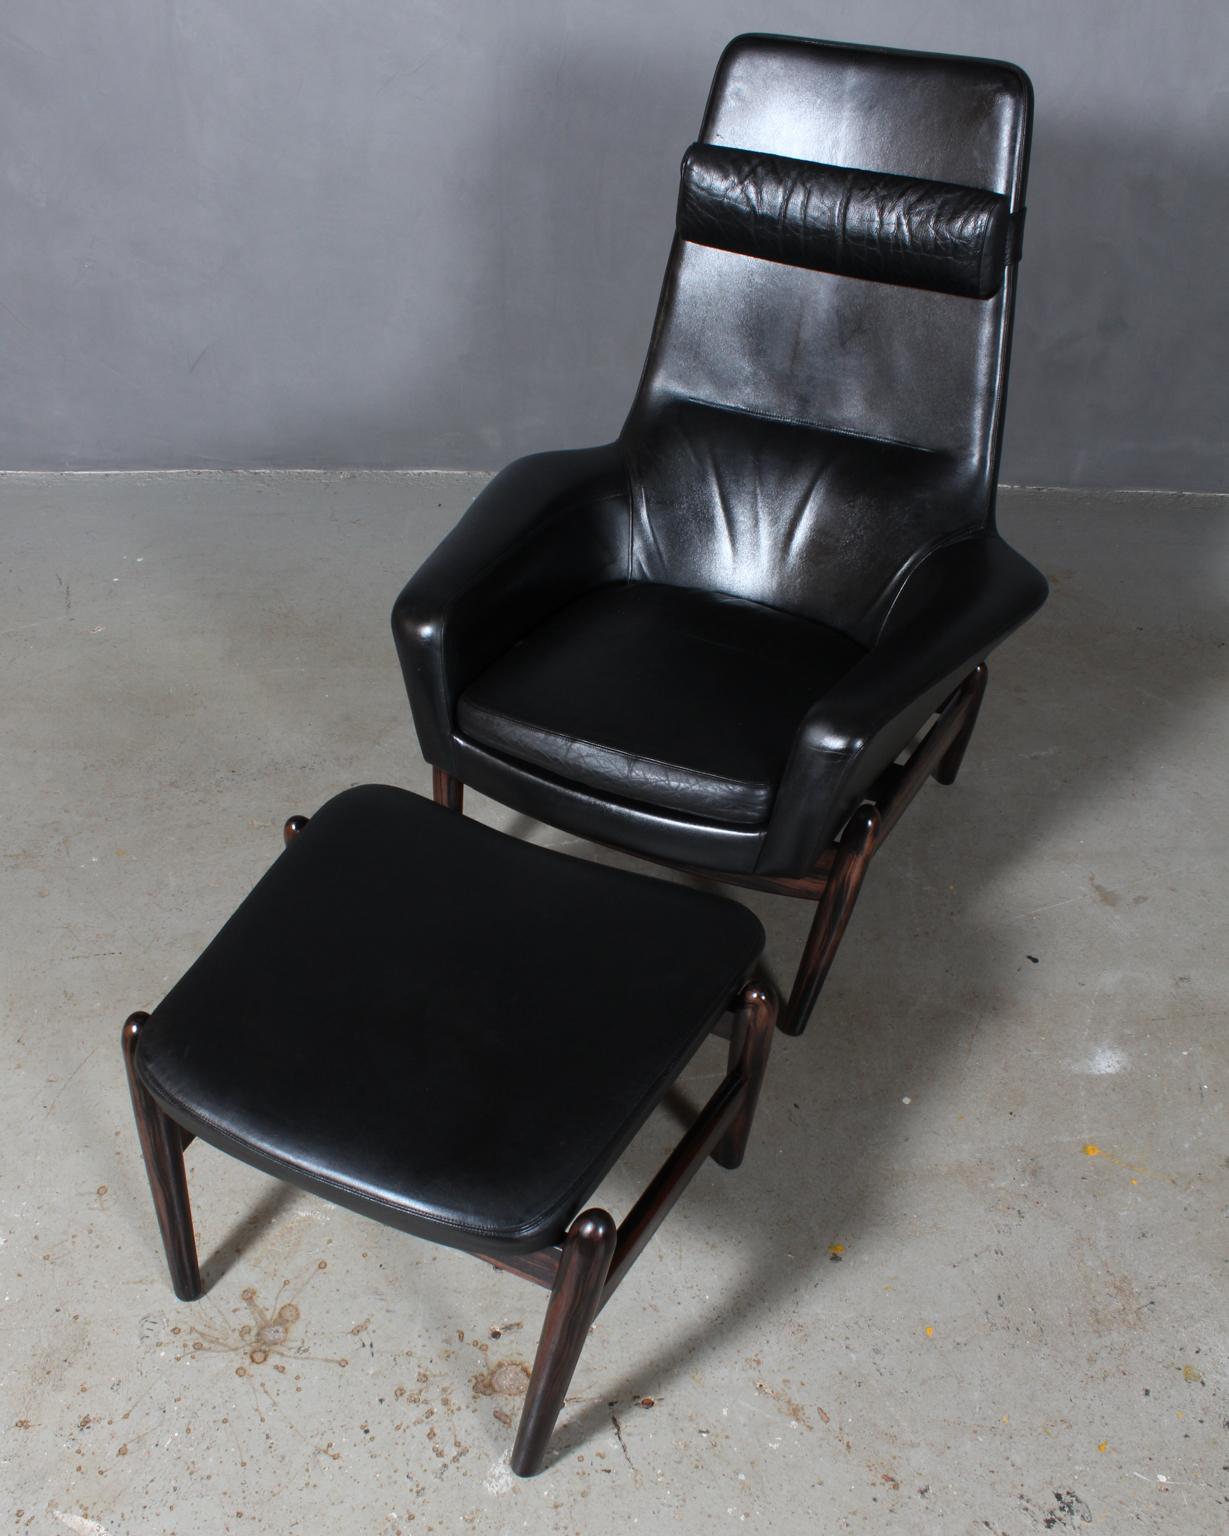 Arnold Madsen lounge chair with ottoman original black leather.

Frame of beech with rosewood stain.

Tilt function.

Model MS 30, made by Madsen & Schubell.